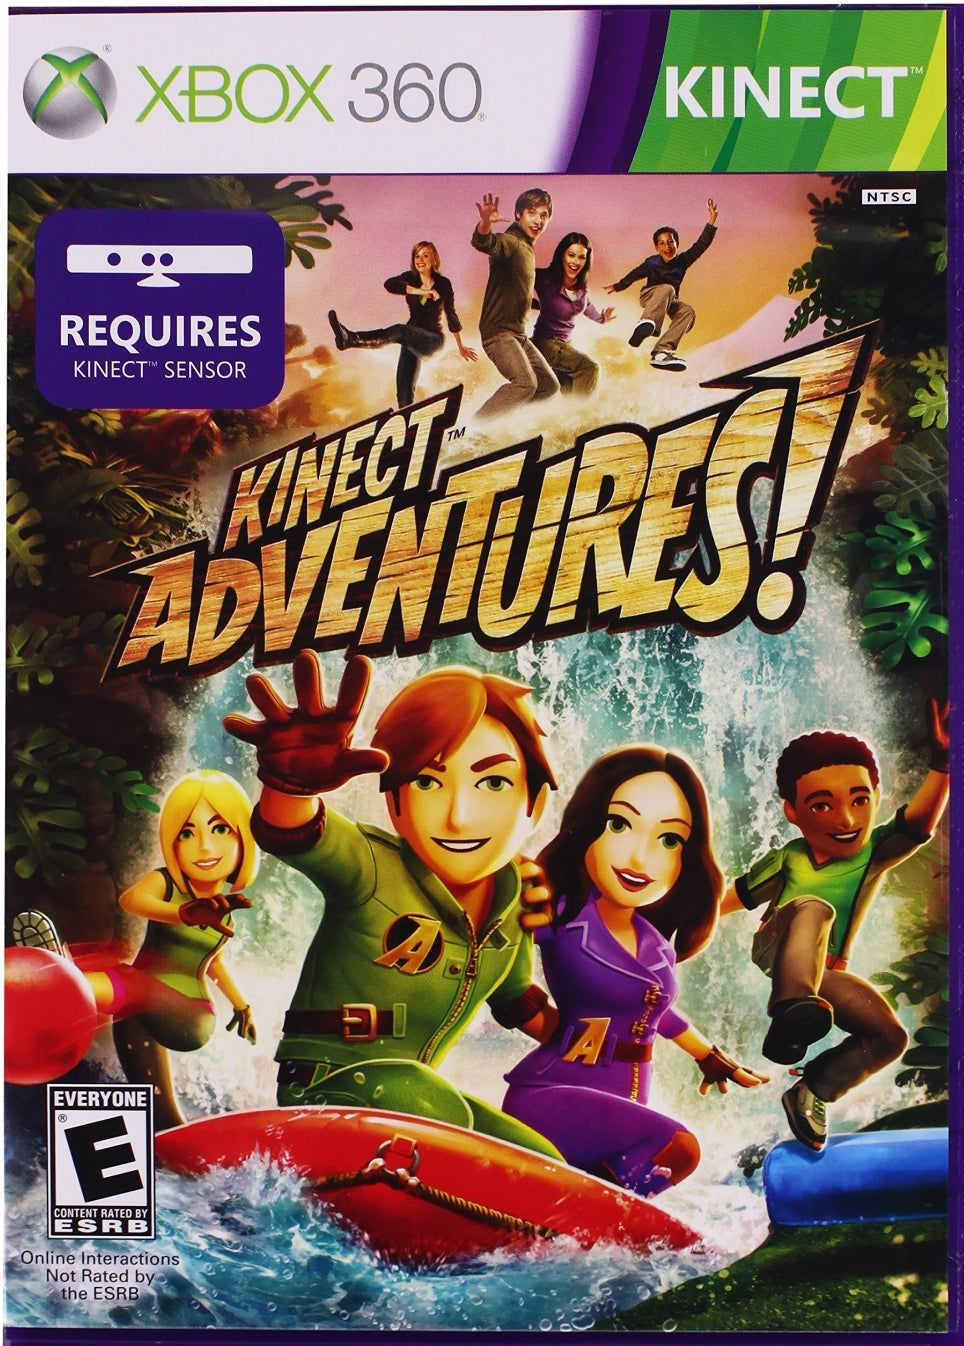 KINECT ADVENTURES: A Xbox 360 Game, manual & case. (Used/works great)